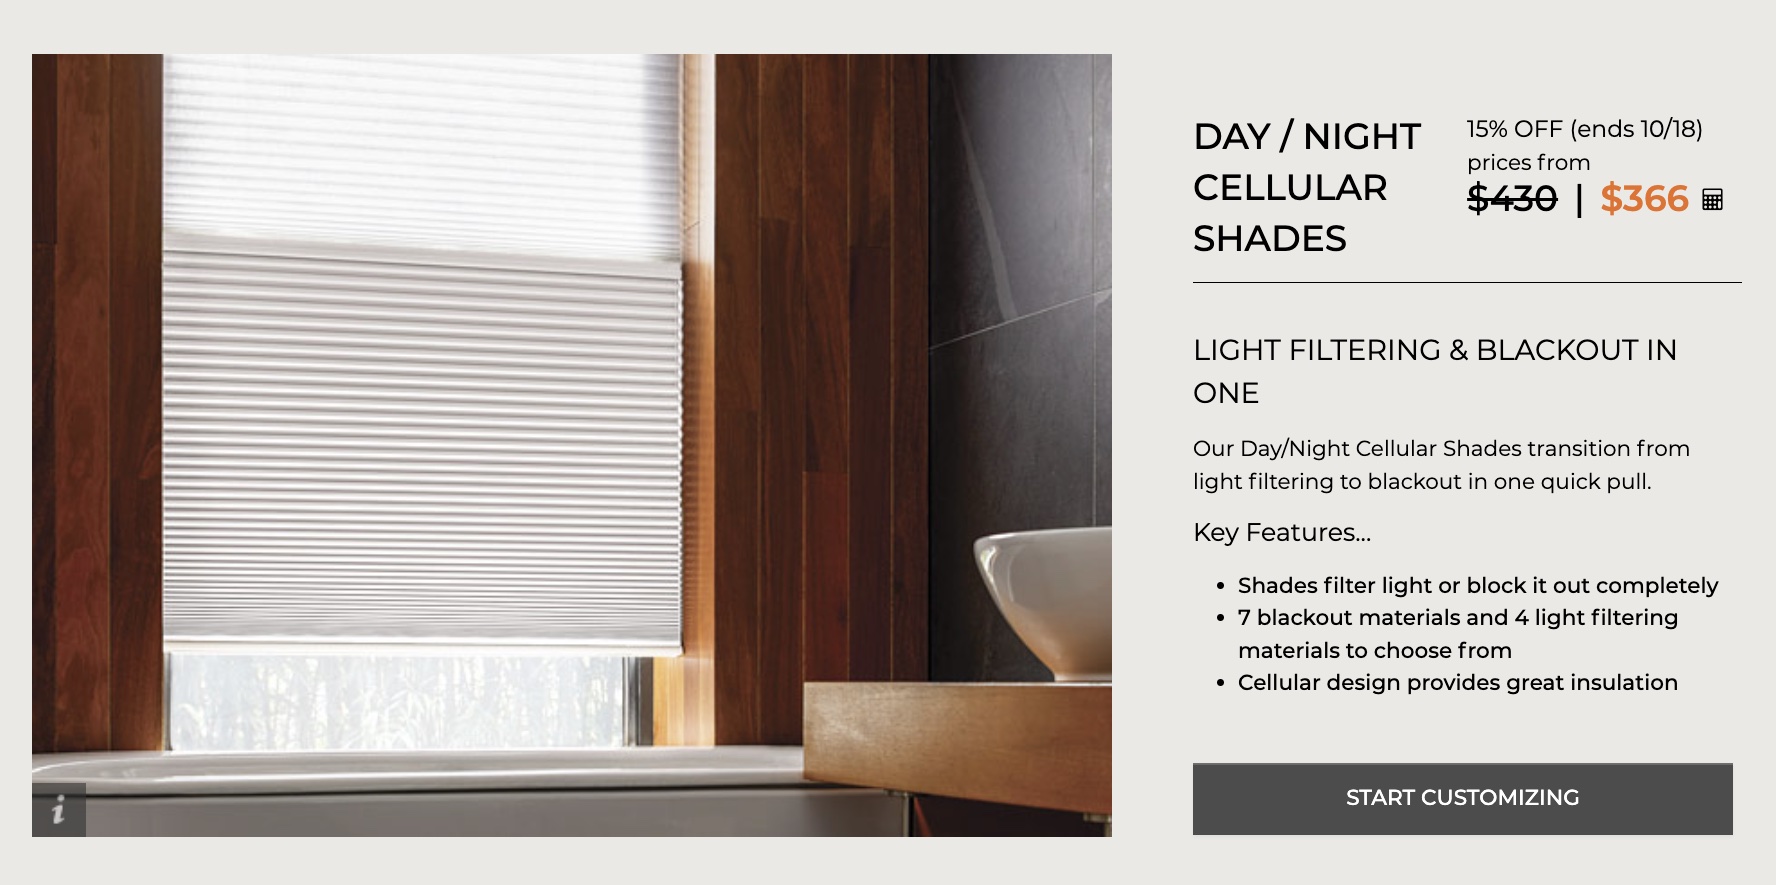 day night cellular shades review 